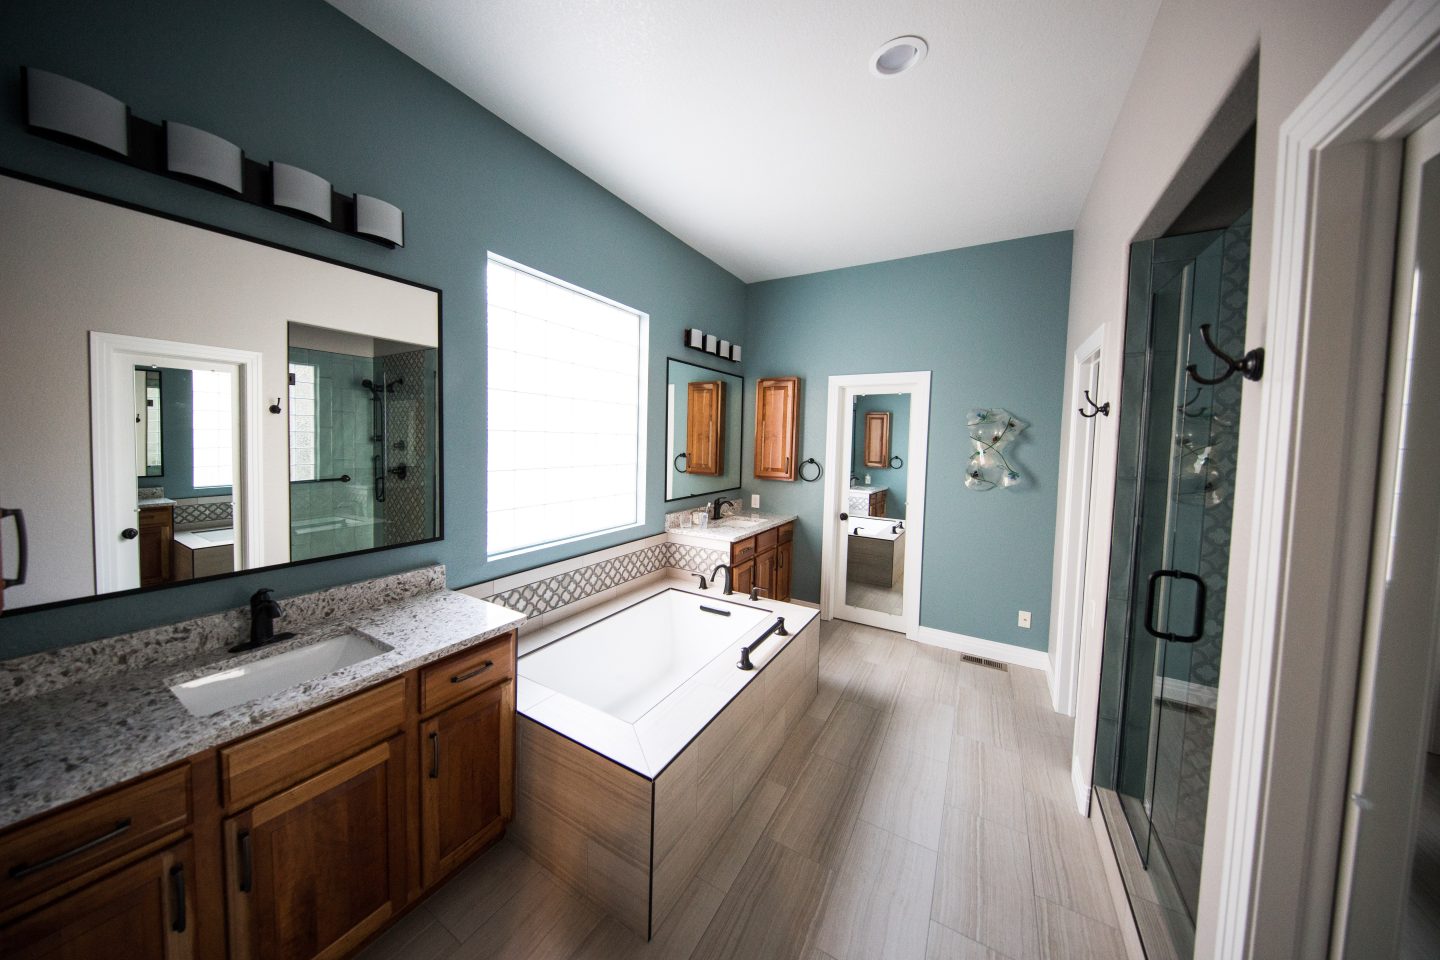 5 Important Things to Do to Paint a Bathroom Right